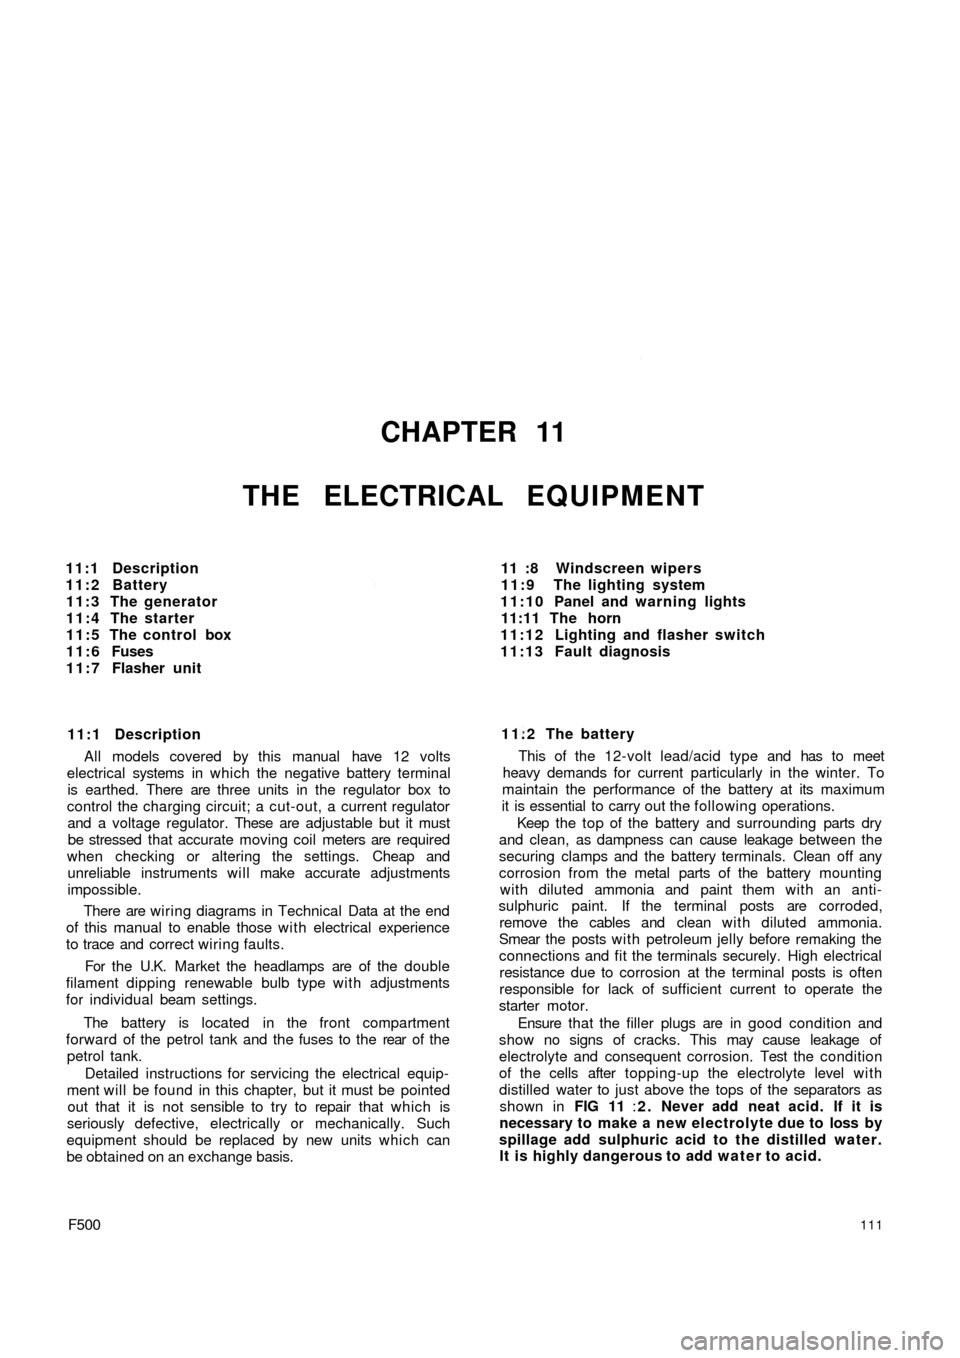 FIAT 500 1971 1.G Workshop Manual CHAPTER 11
THE ELECTRICAL EQUIPMENT
11:1 Description
11:2 Battery
11:3 The generator
11:4 The starter
11:5 The control box
1 1 : 6 Fuses
1 1 : 7 Flasher unit
11:1 Description
All models covered by thi